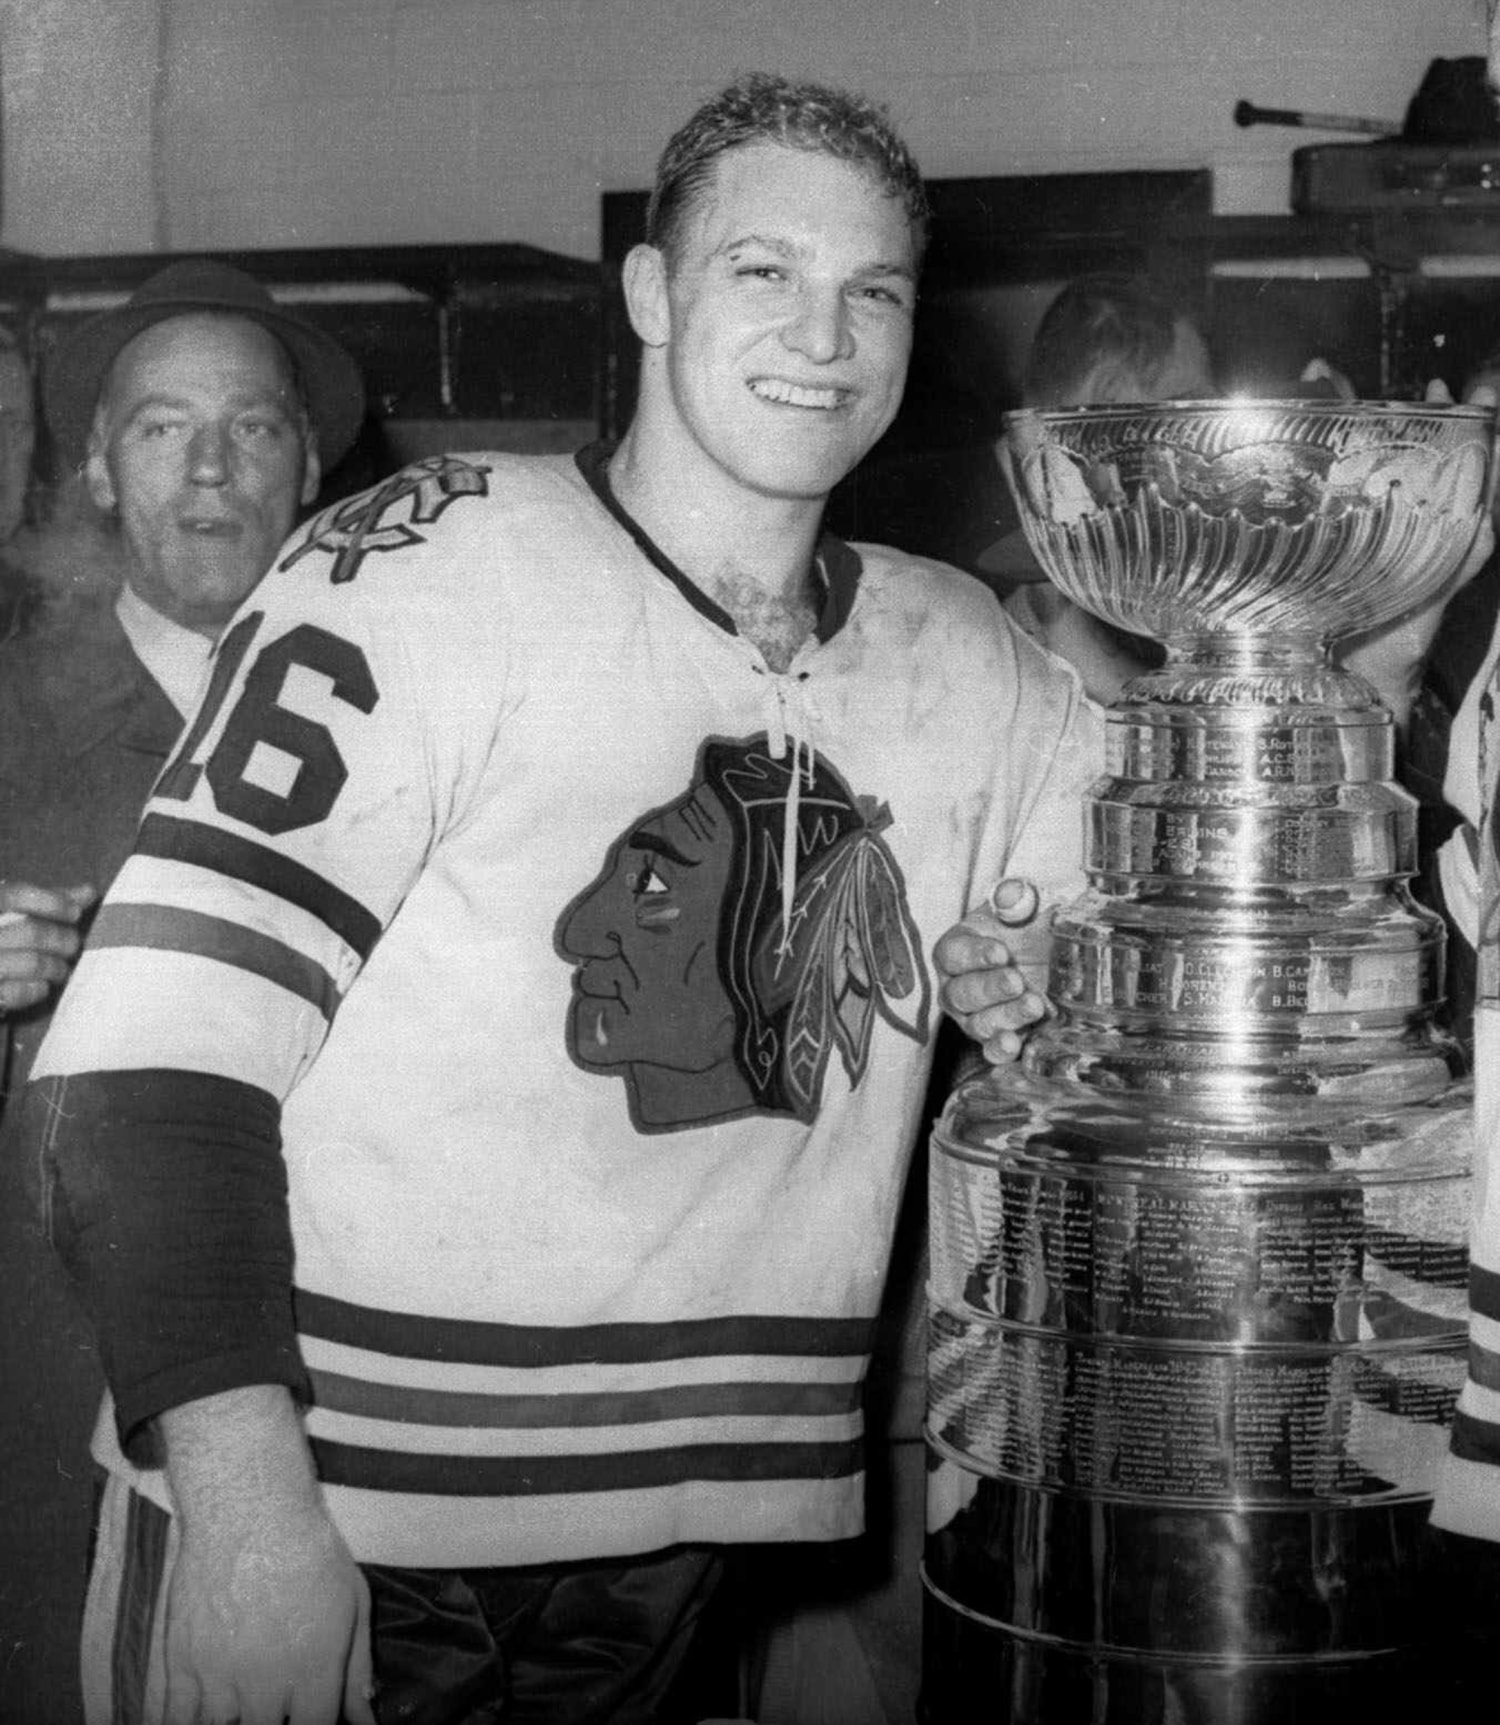 Bobby Hull The Golden Jet, Original laser wire photos from my collection